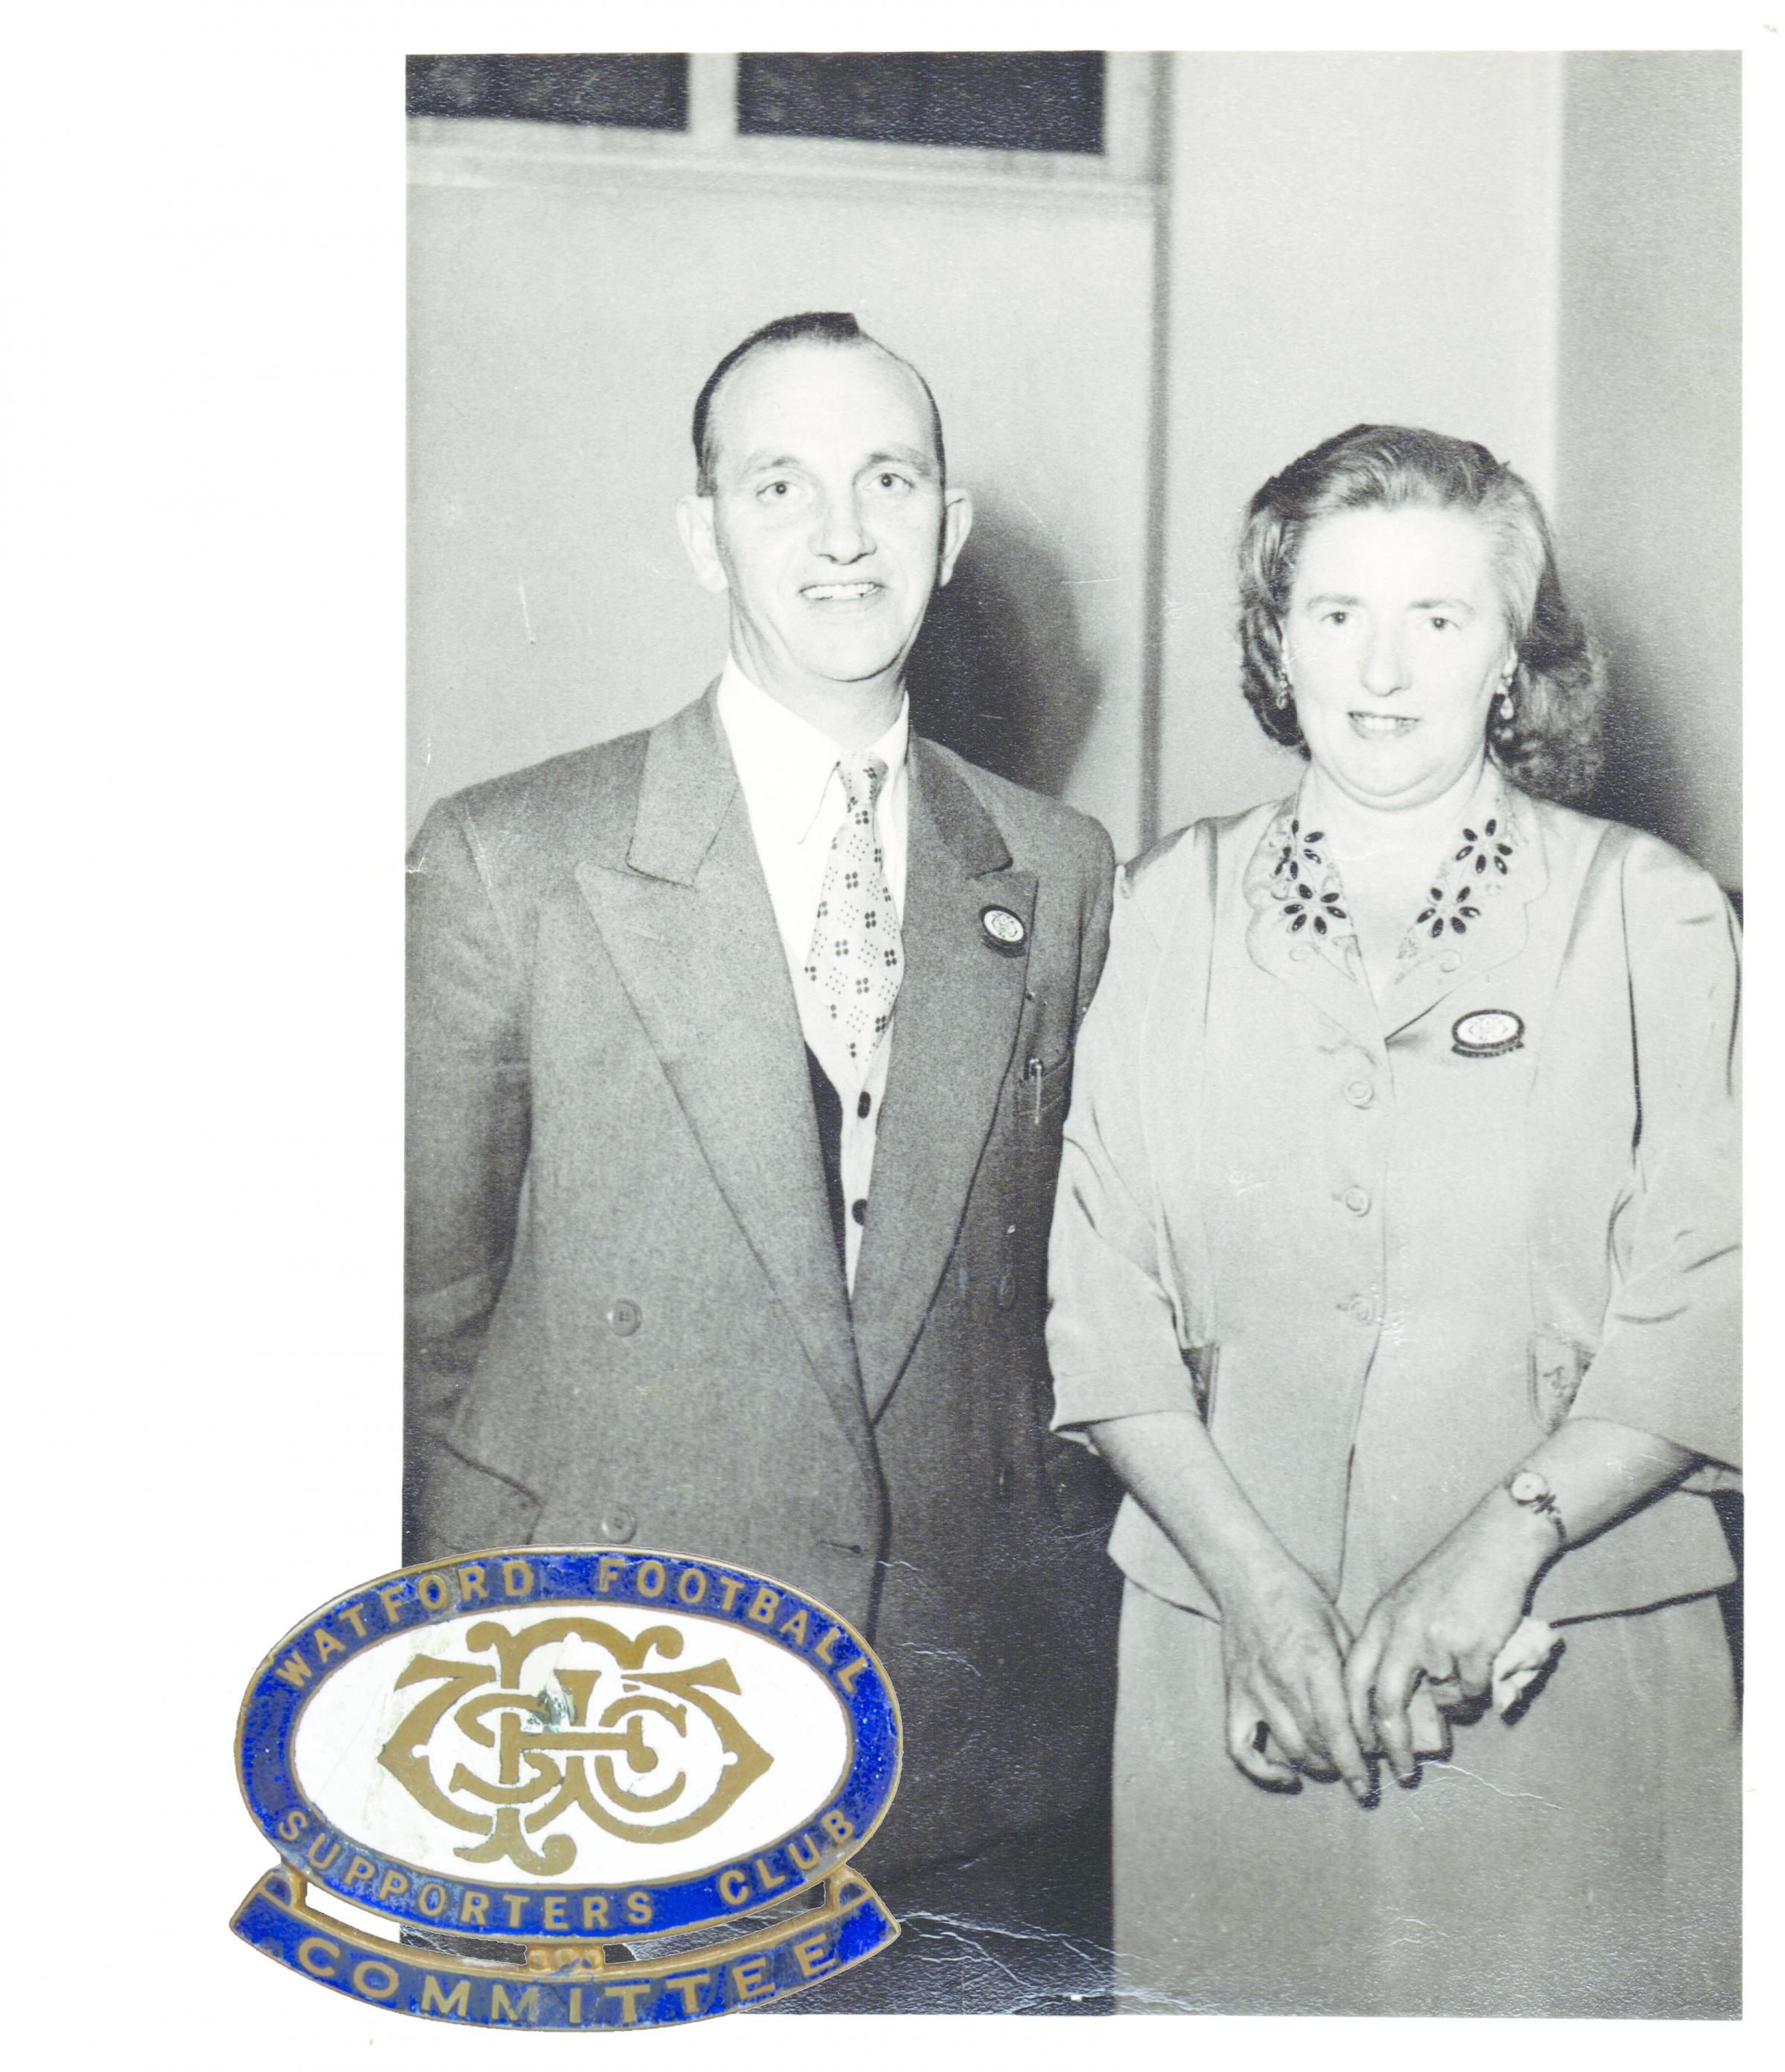 Ron and Violet Tomlin, secretary and assistant secretary, of the Watford Football Supporters Club shown wearing their committe badges. Picture courtesy Denise Gaskin